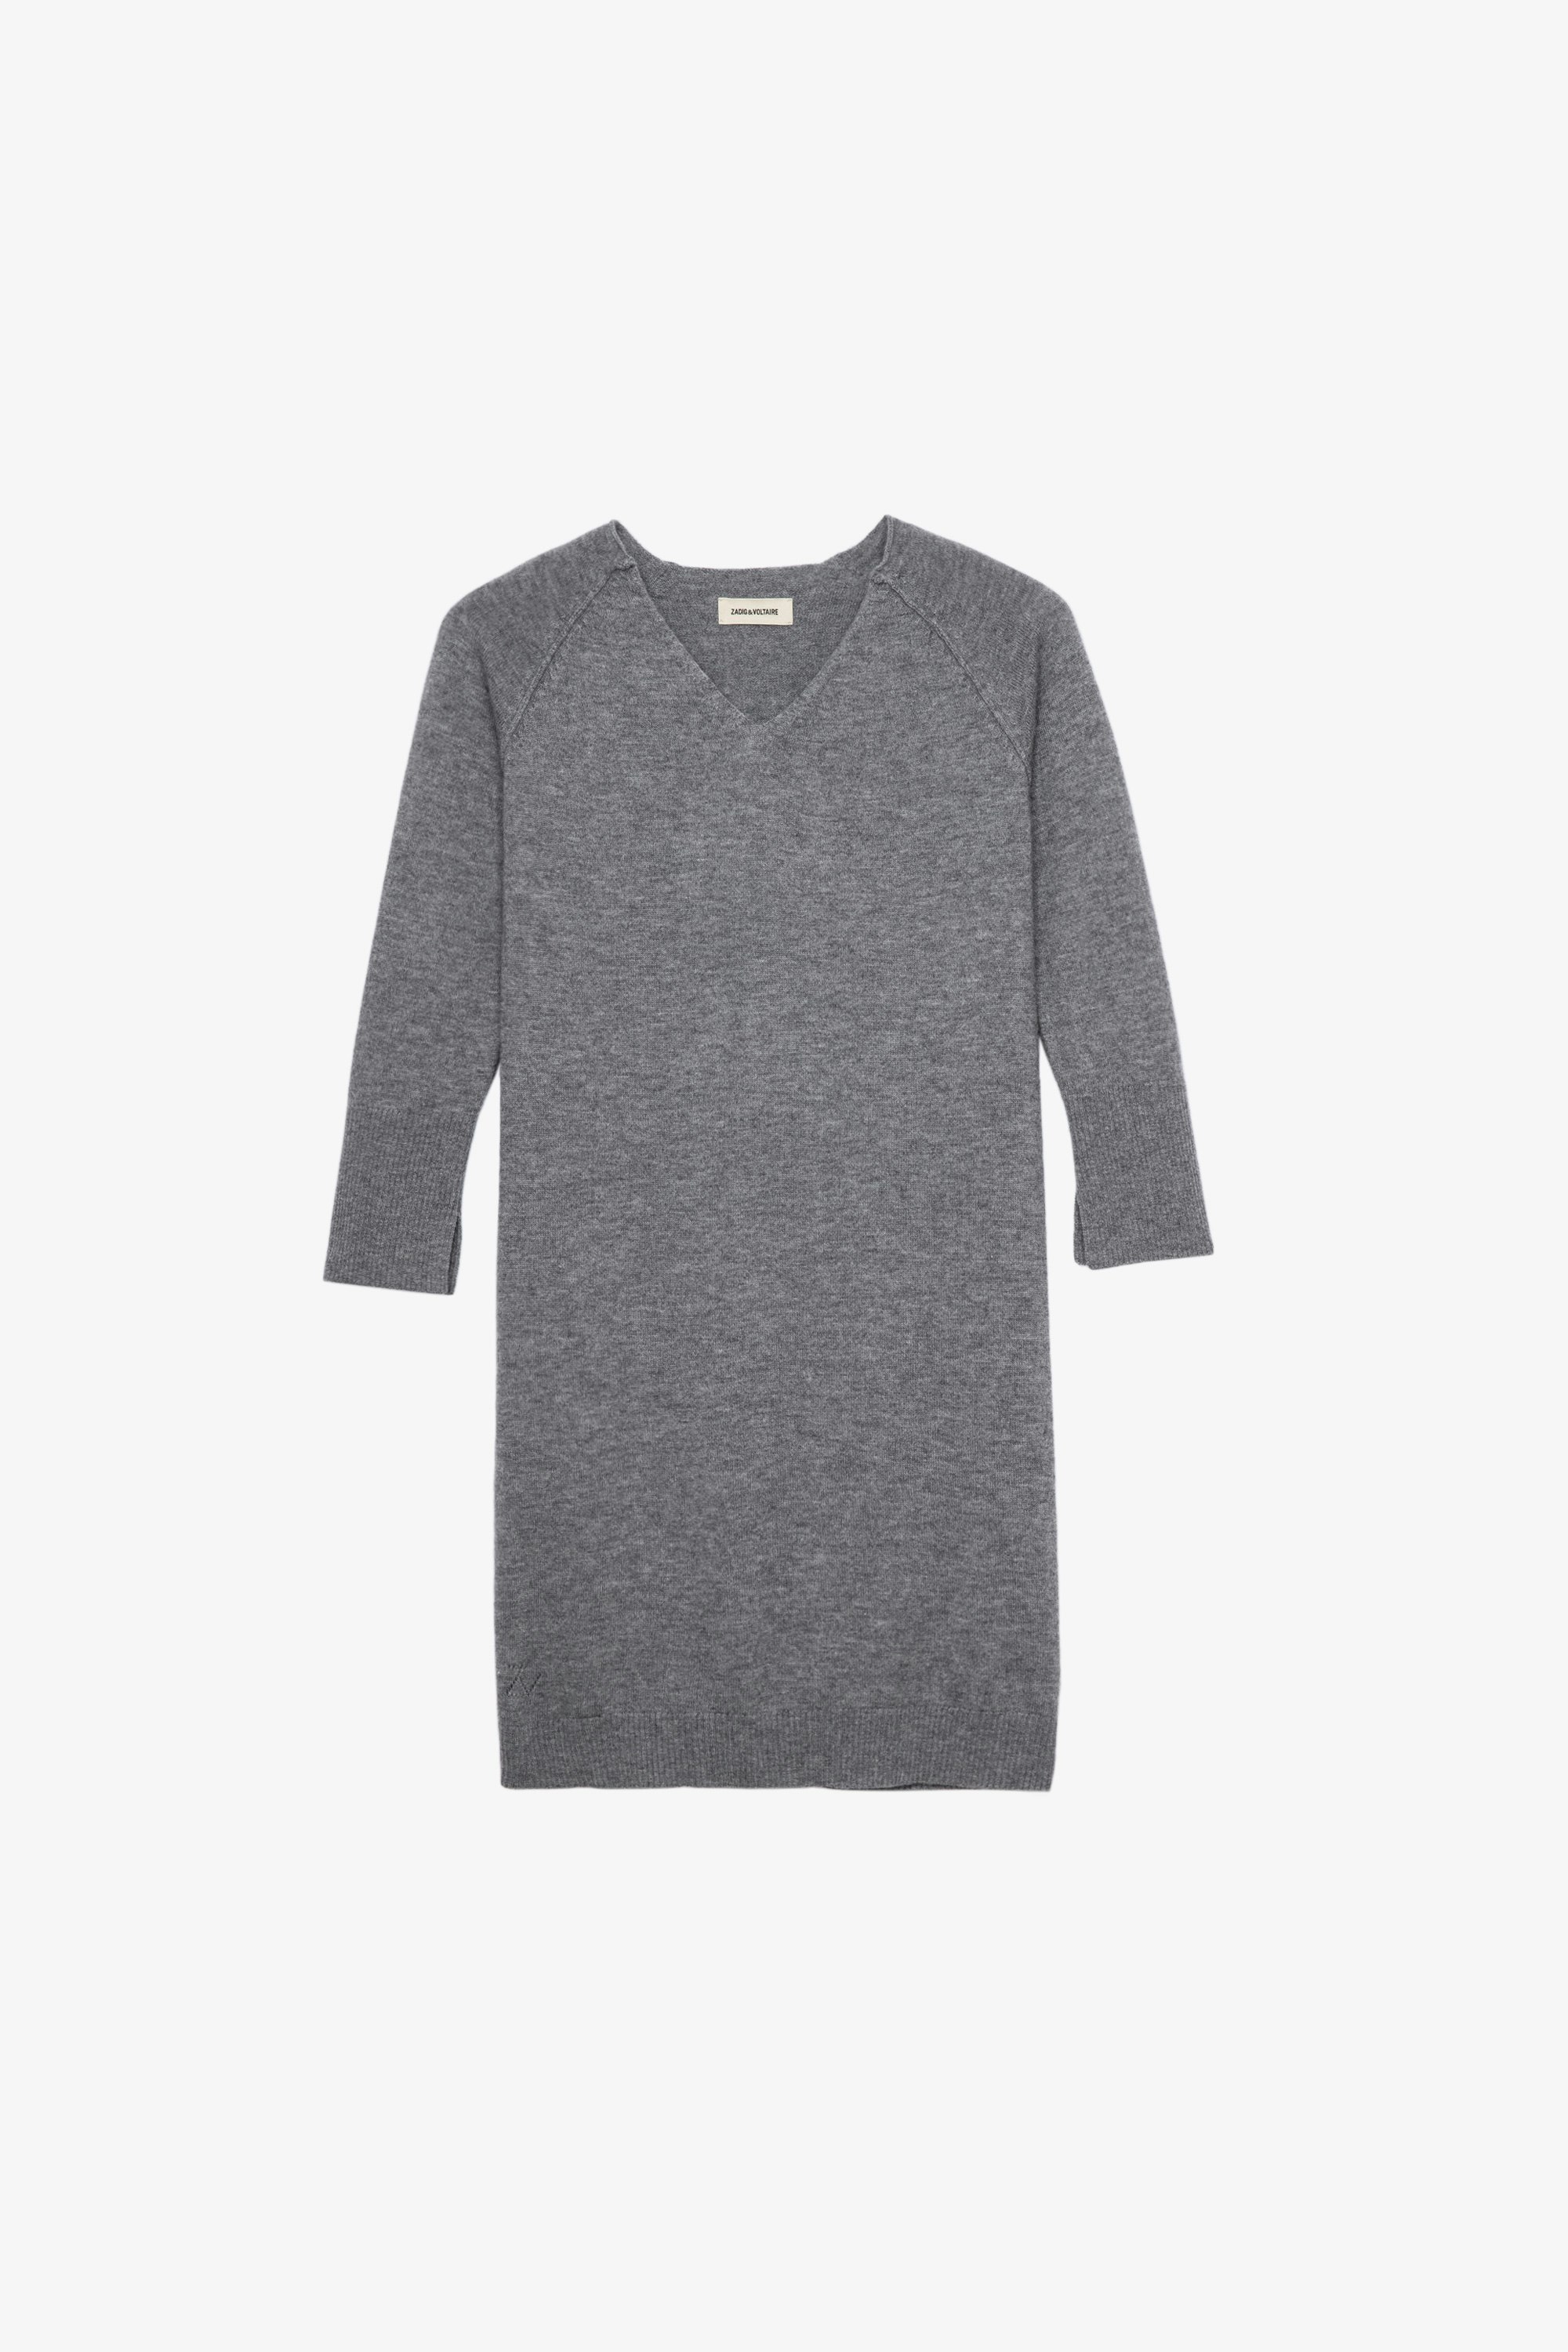 Carrie Children’s ワンピース Children’s grey long-sleeve knit dress with print on back 